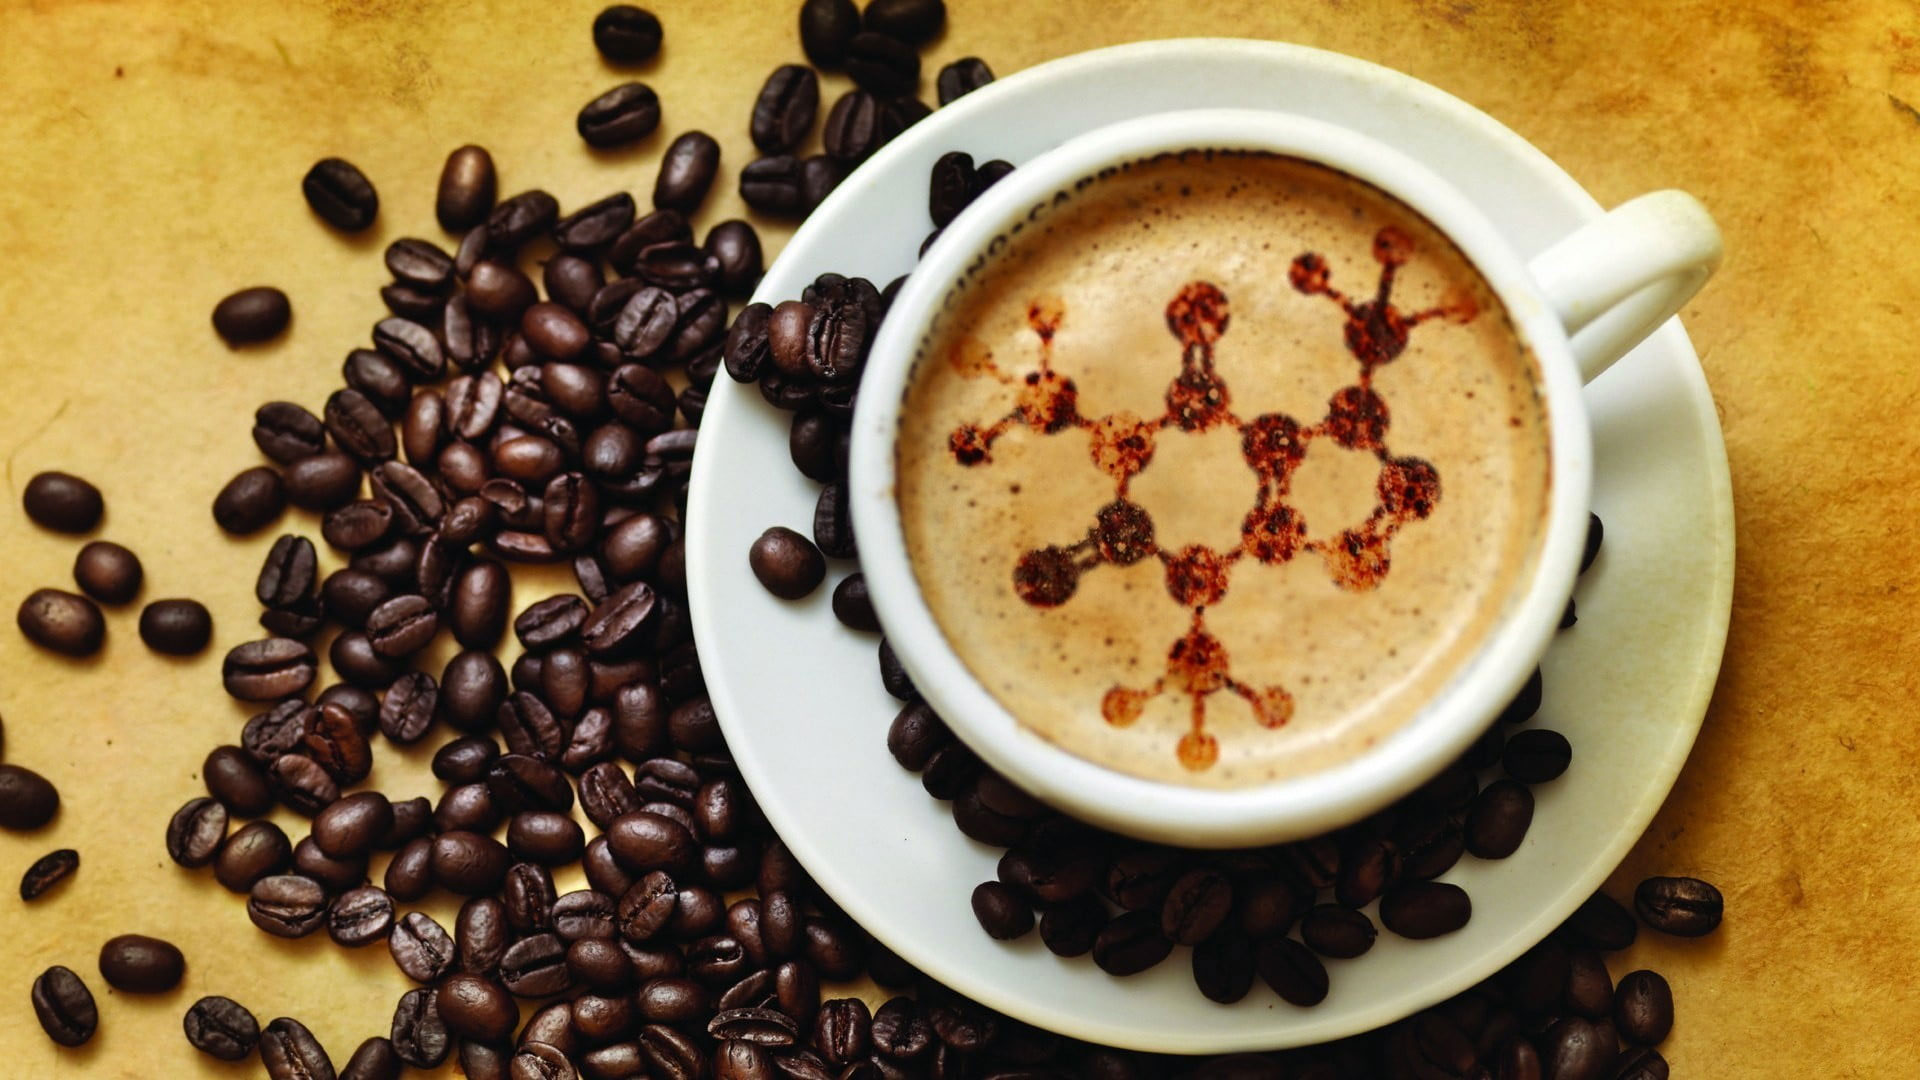 Teacup and saucer wallpaper, science, chemistry, coffee, drink, chemical structures